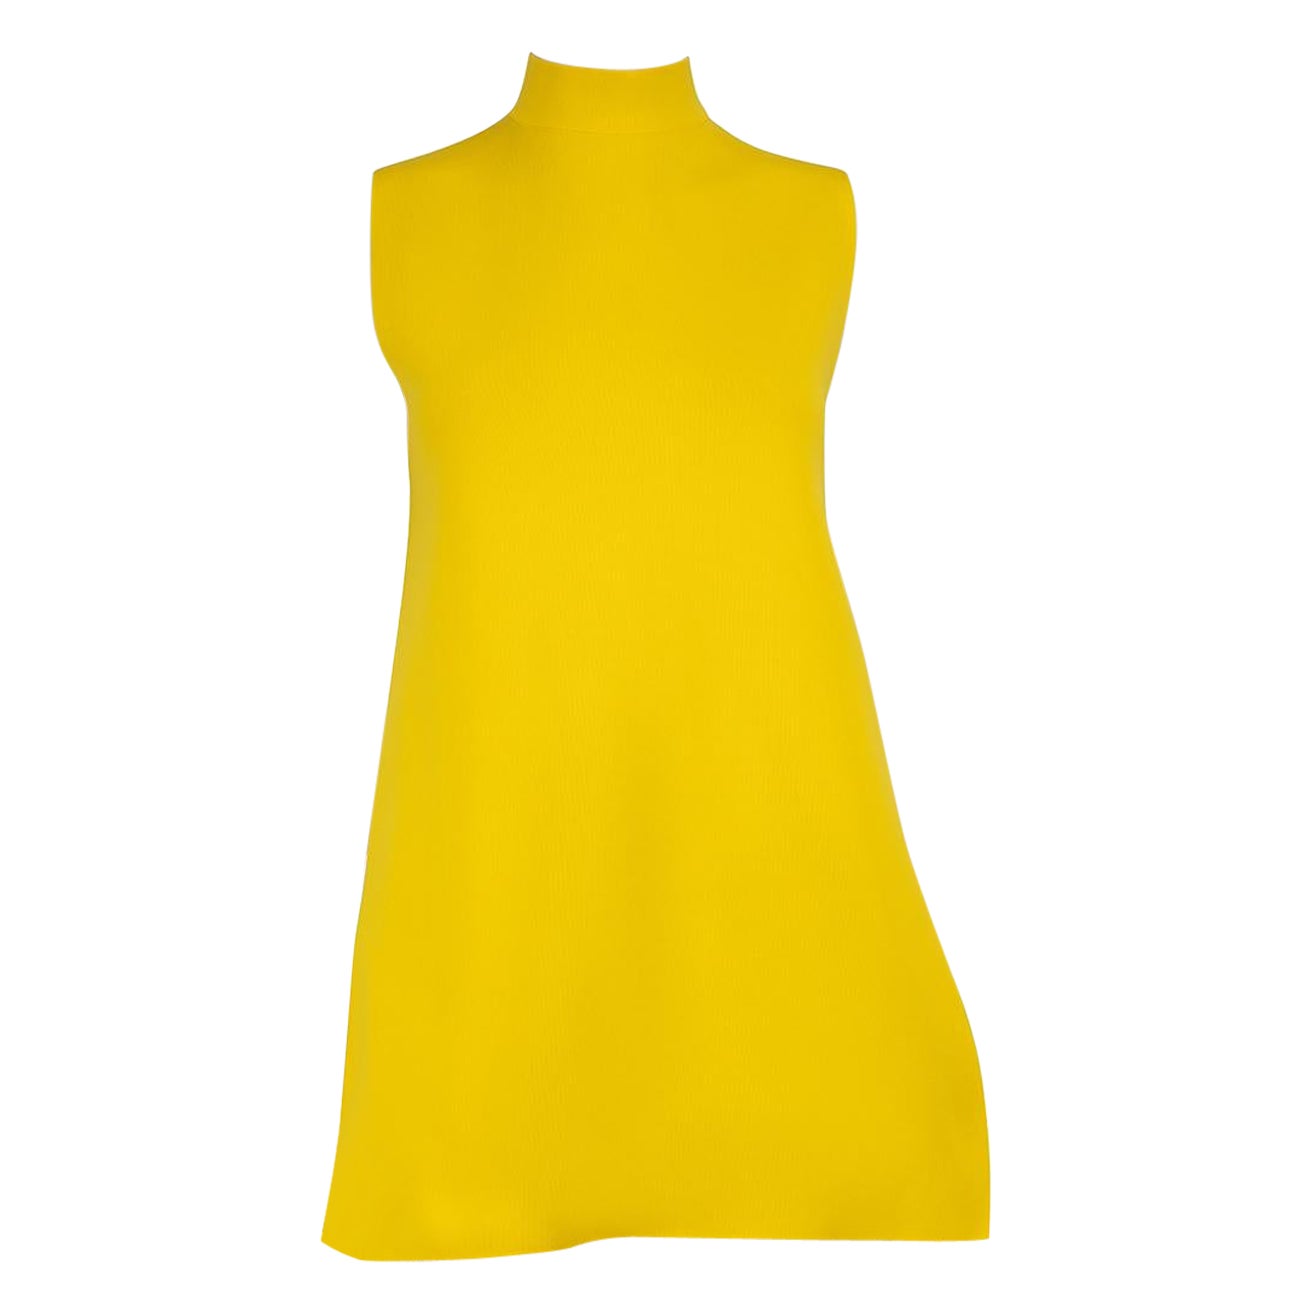 Marni Yellow Mock Neck Sleeveless Knit Top Size L For Sale